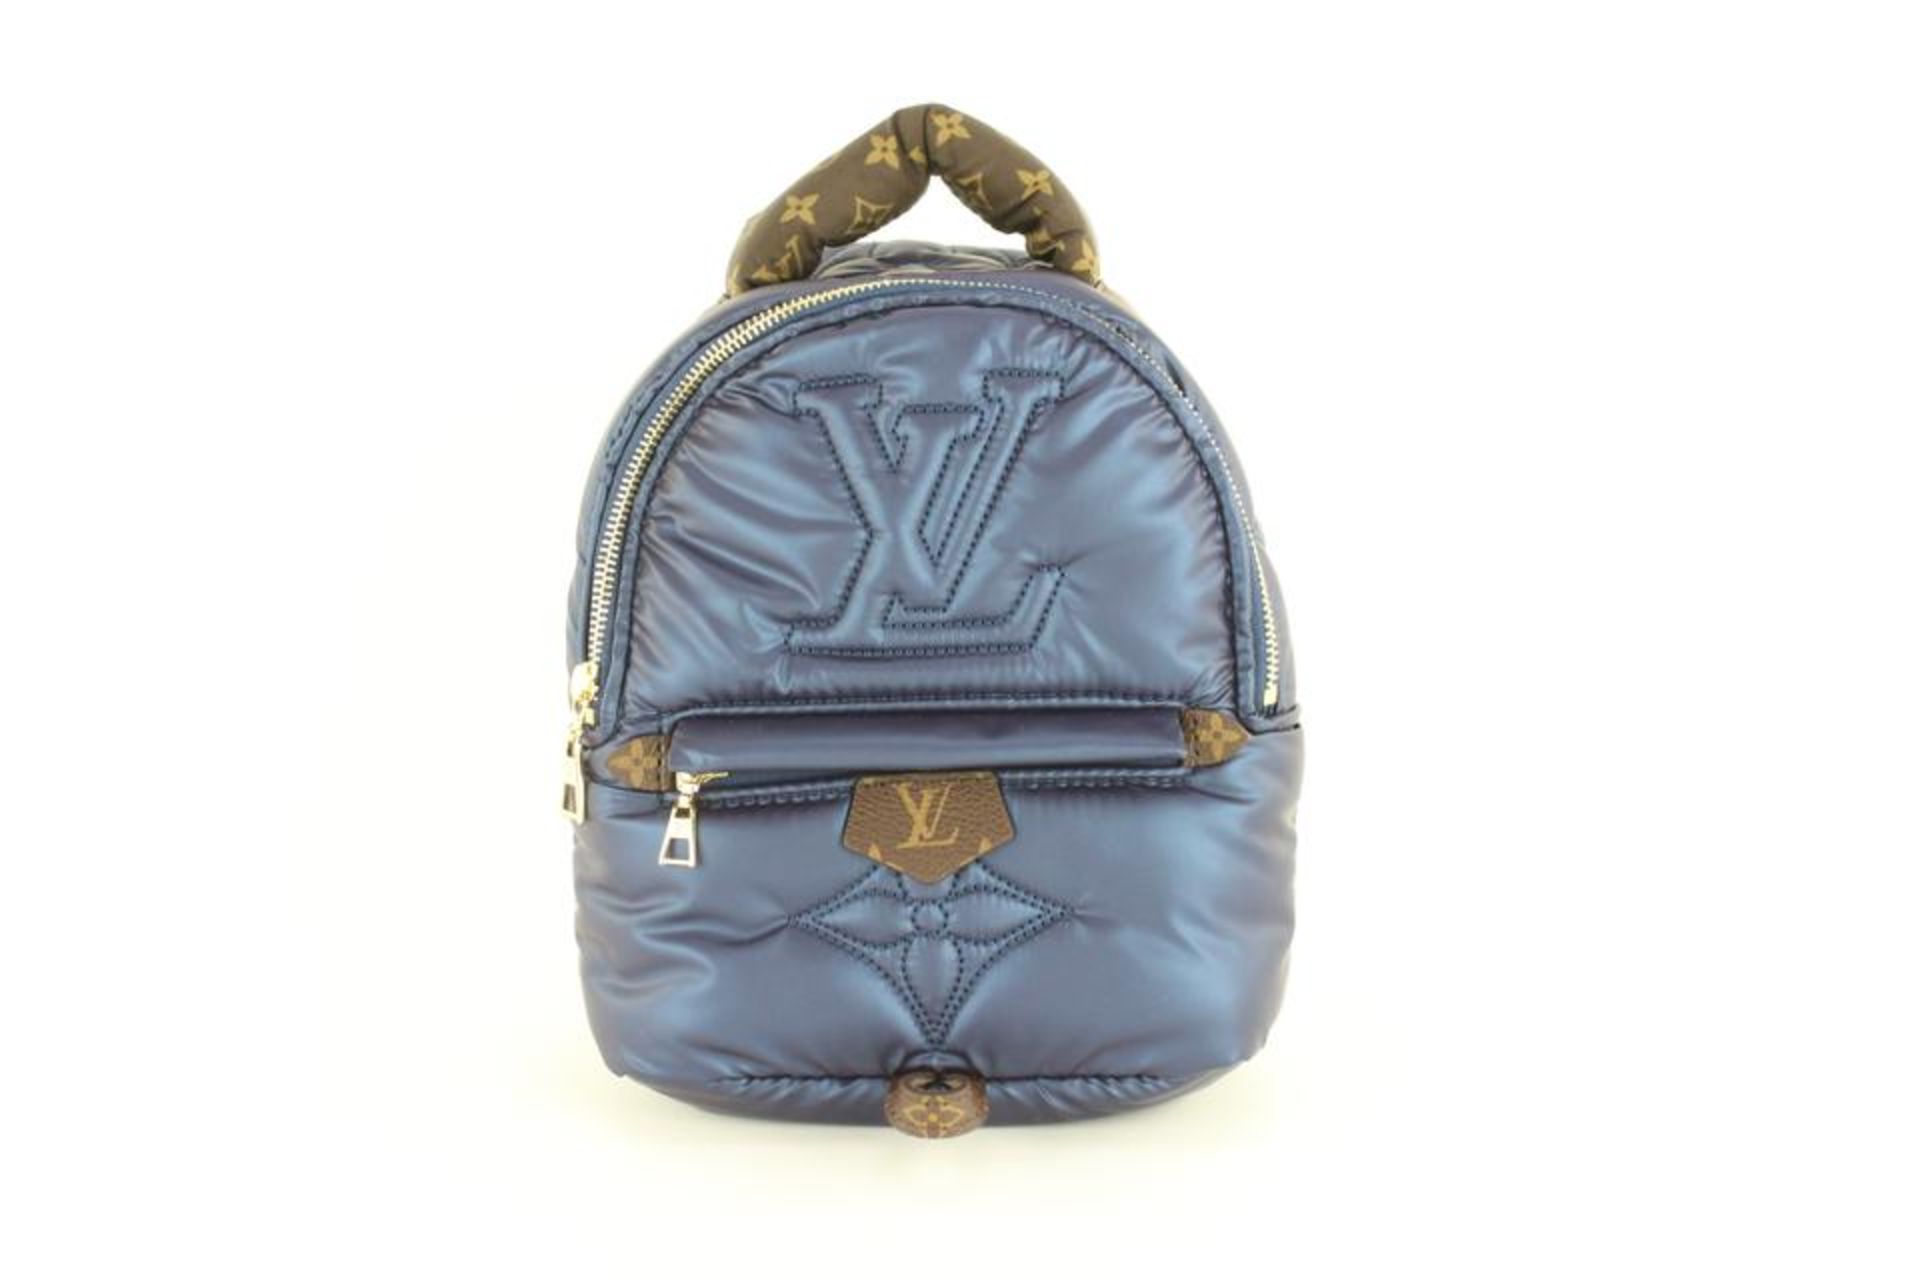 LOUIS VUITTON RARE 2023 PUFFER PILLOW PALM SPRING MINI BACKPACK - Image 2 of 11